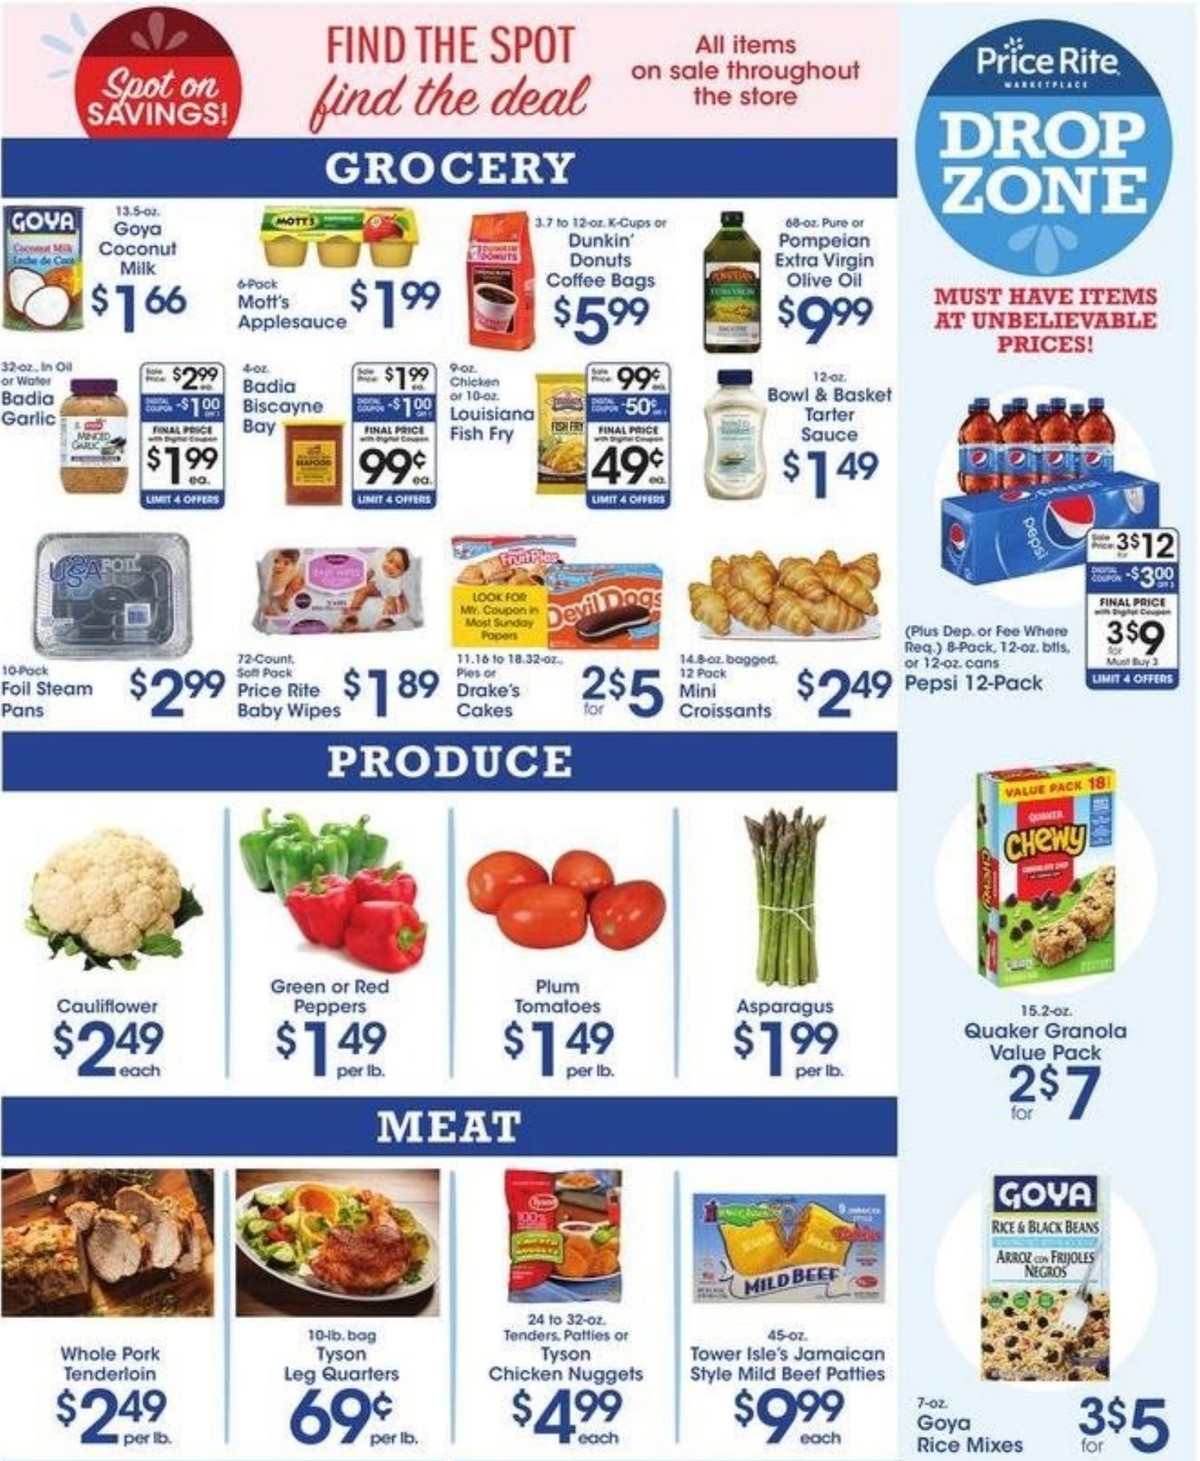 Price Rite Weekly Ad from February 12